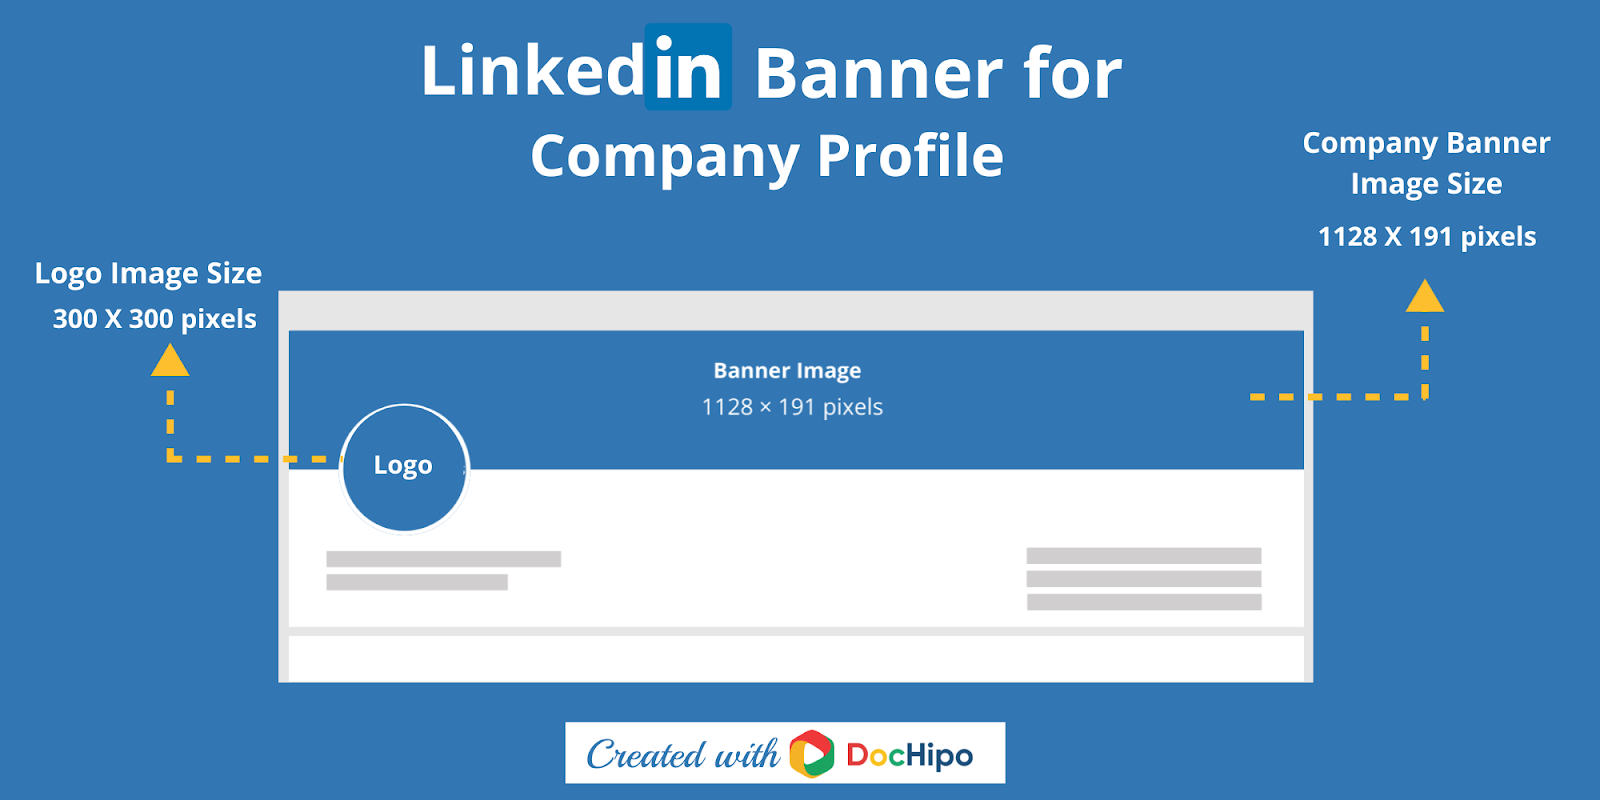 LinkedIn banner size guide for company profile